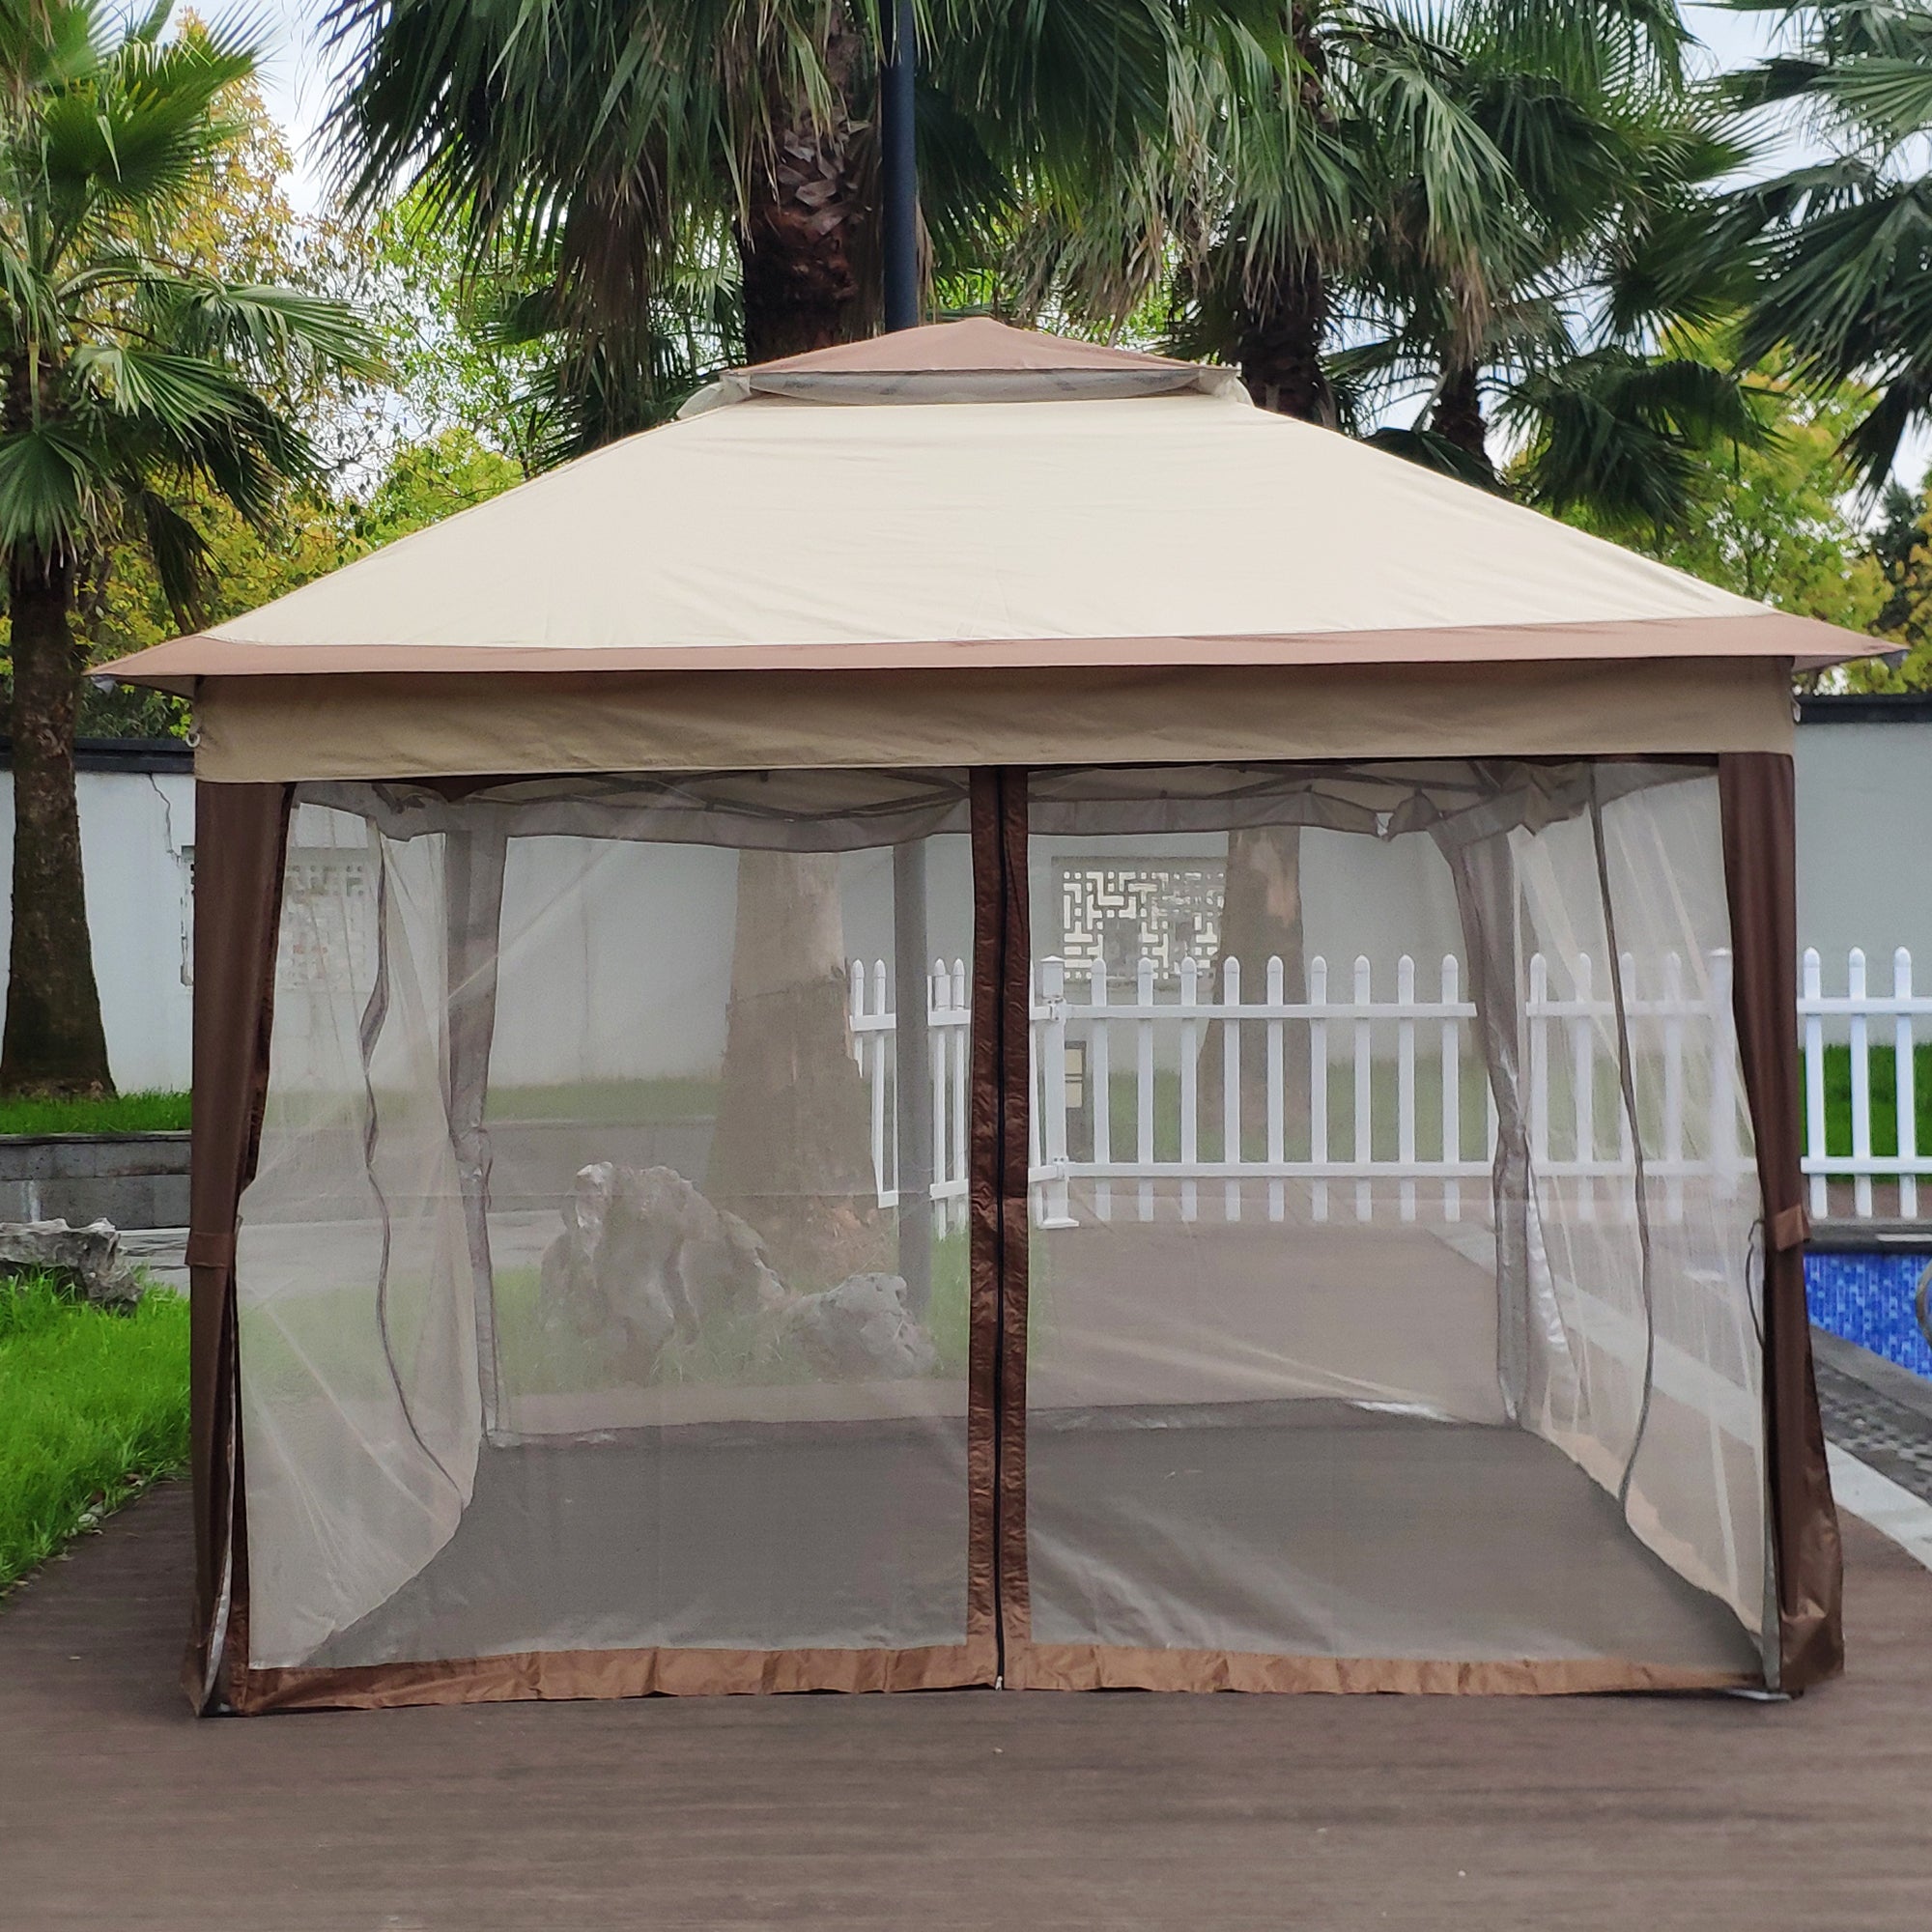 Outdoor 11x 11Ft Pop Up Gazebo Canopy With Removable Zipper Netting,2-Tier Soft Top Event Tent,Suitable For Patio Backyard Garden Camping Area,Coffee